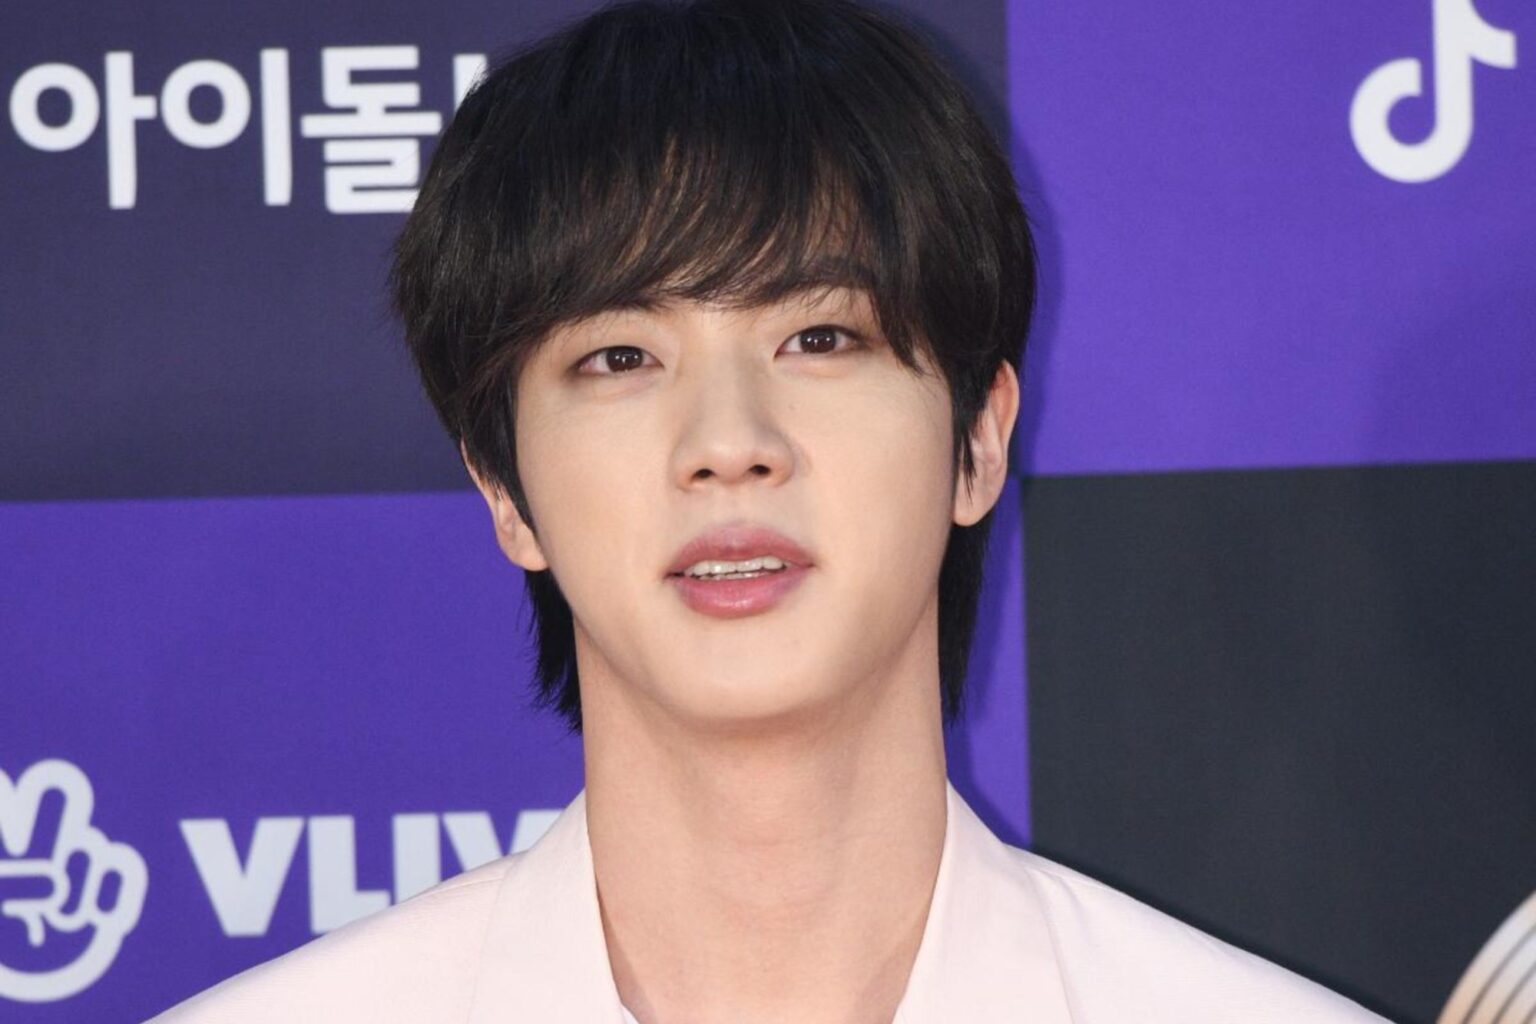 Jin is the oldest member of BTS. Find out when the K-pop star is due to serve in the Korean military.